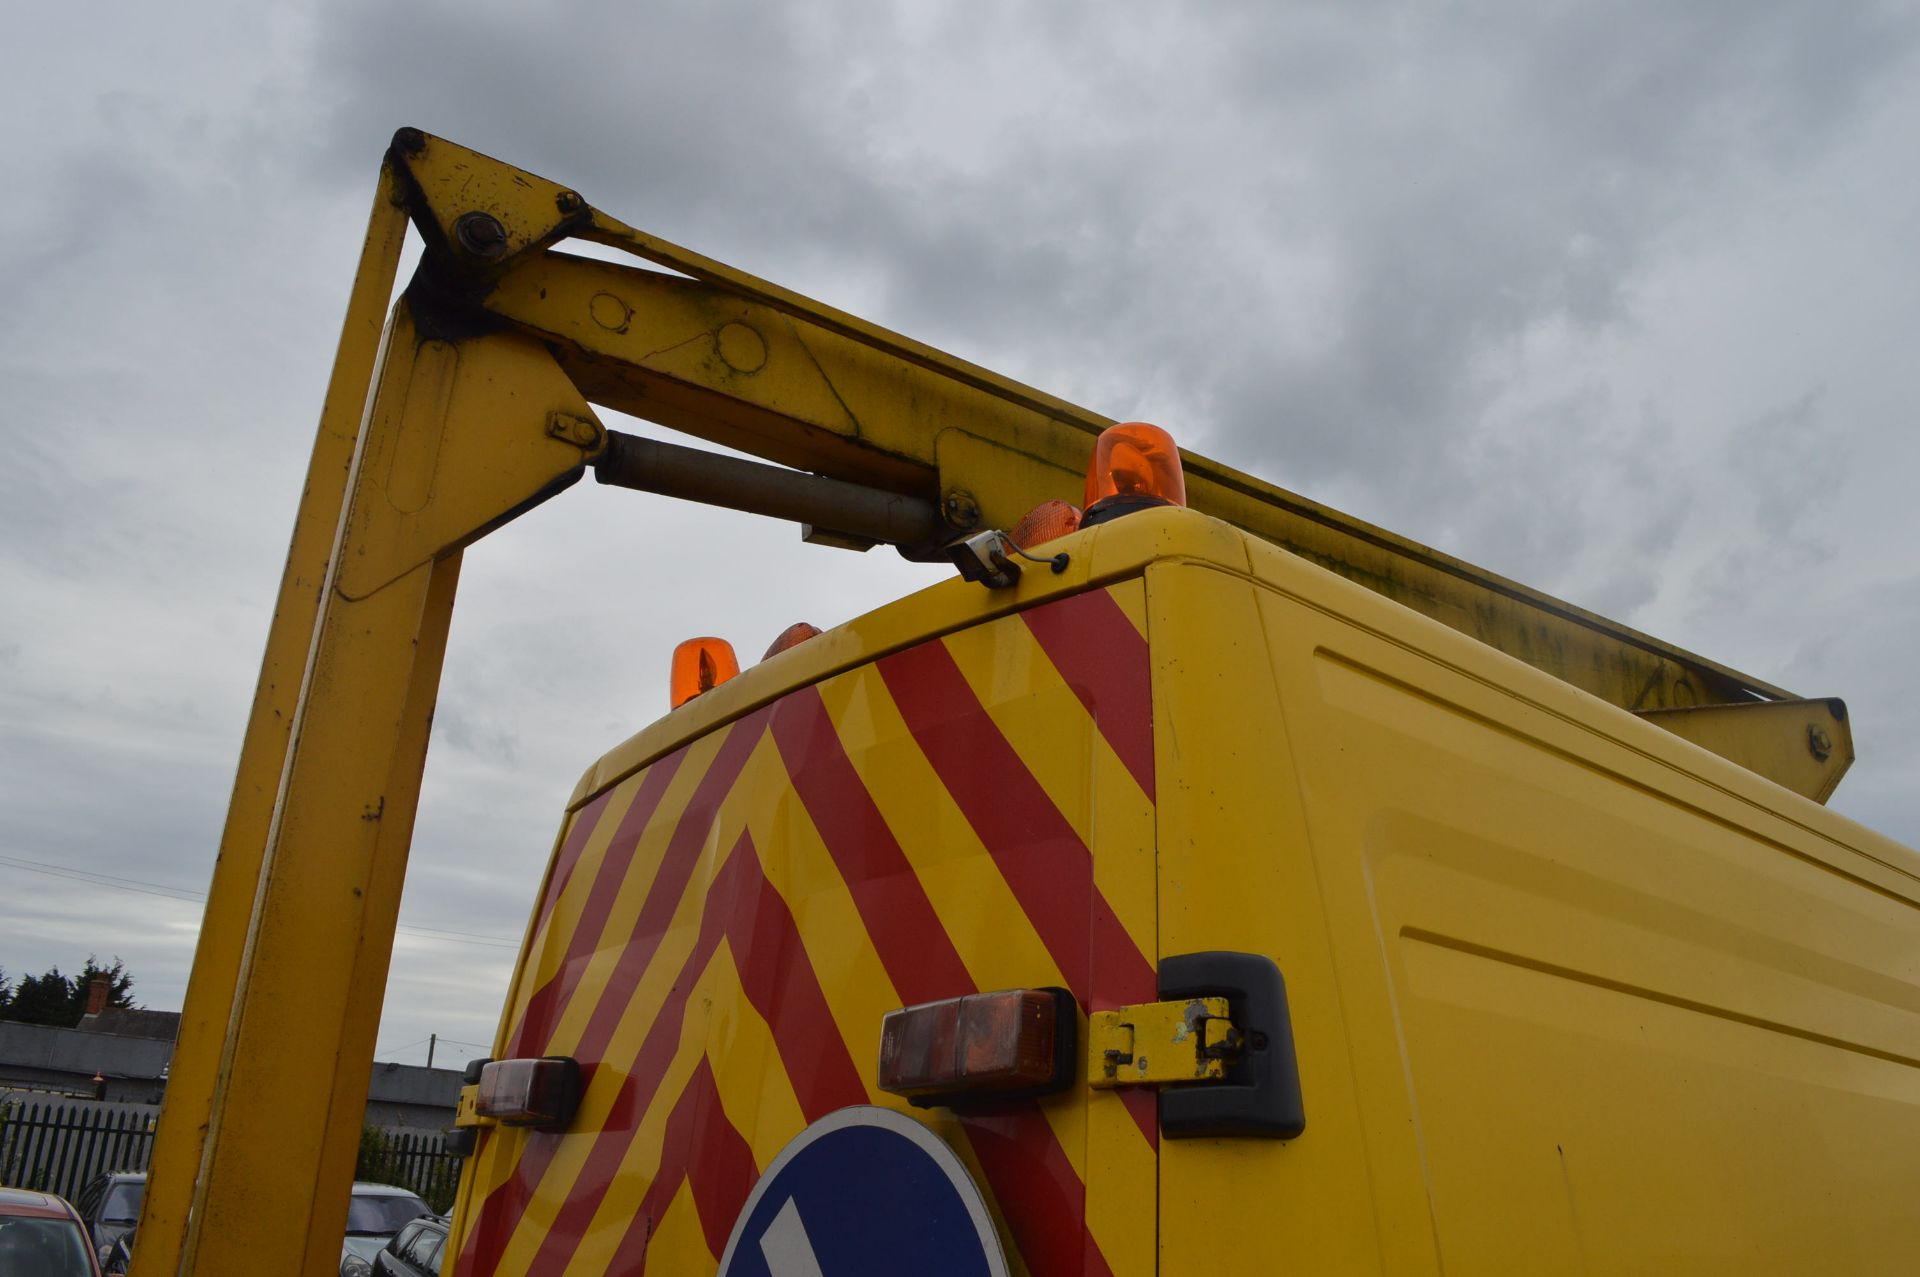 CHERRY PICKER 2000/V REG IVECO-FORD DAILY 2000 50C11 - 1 FORMER KEEPER - Image 18 of 24